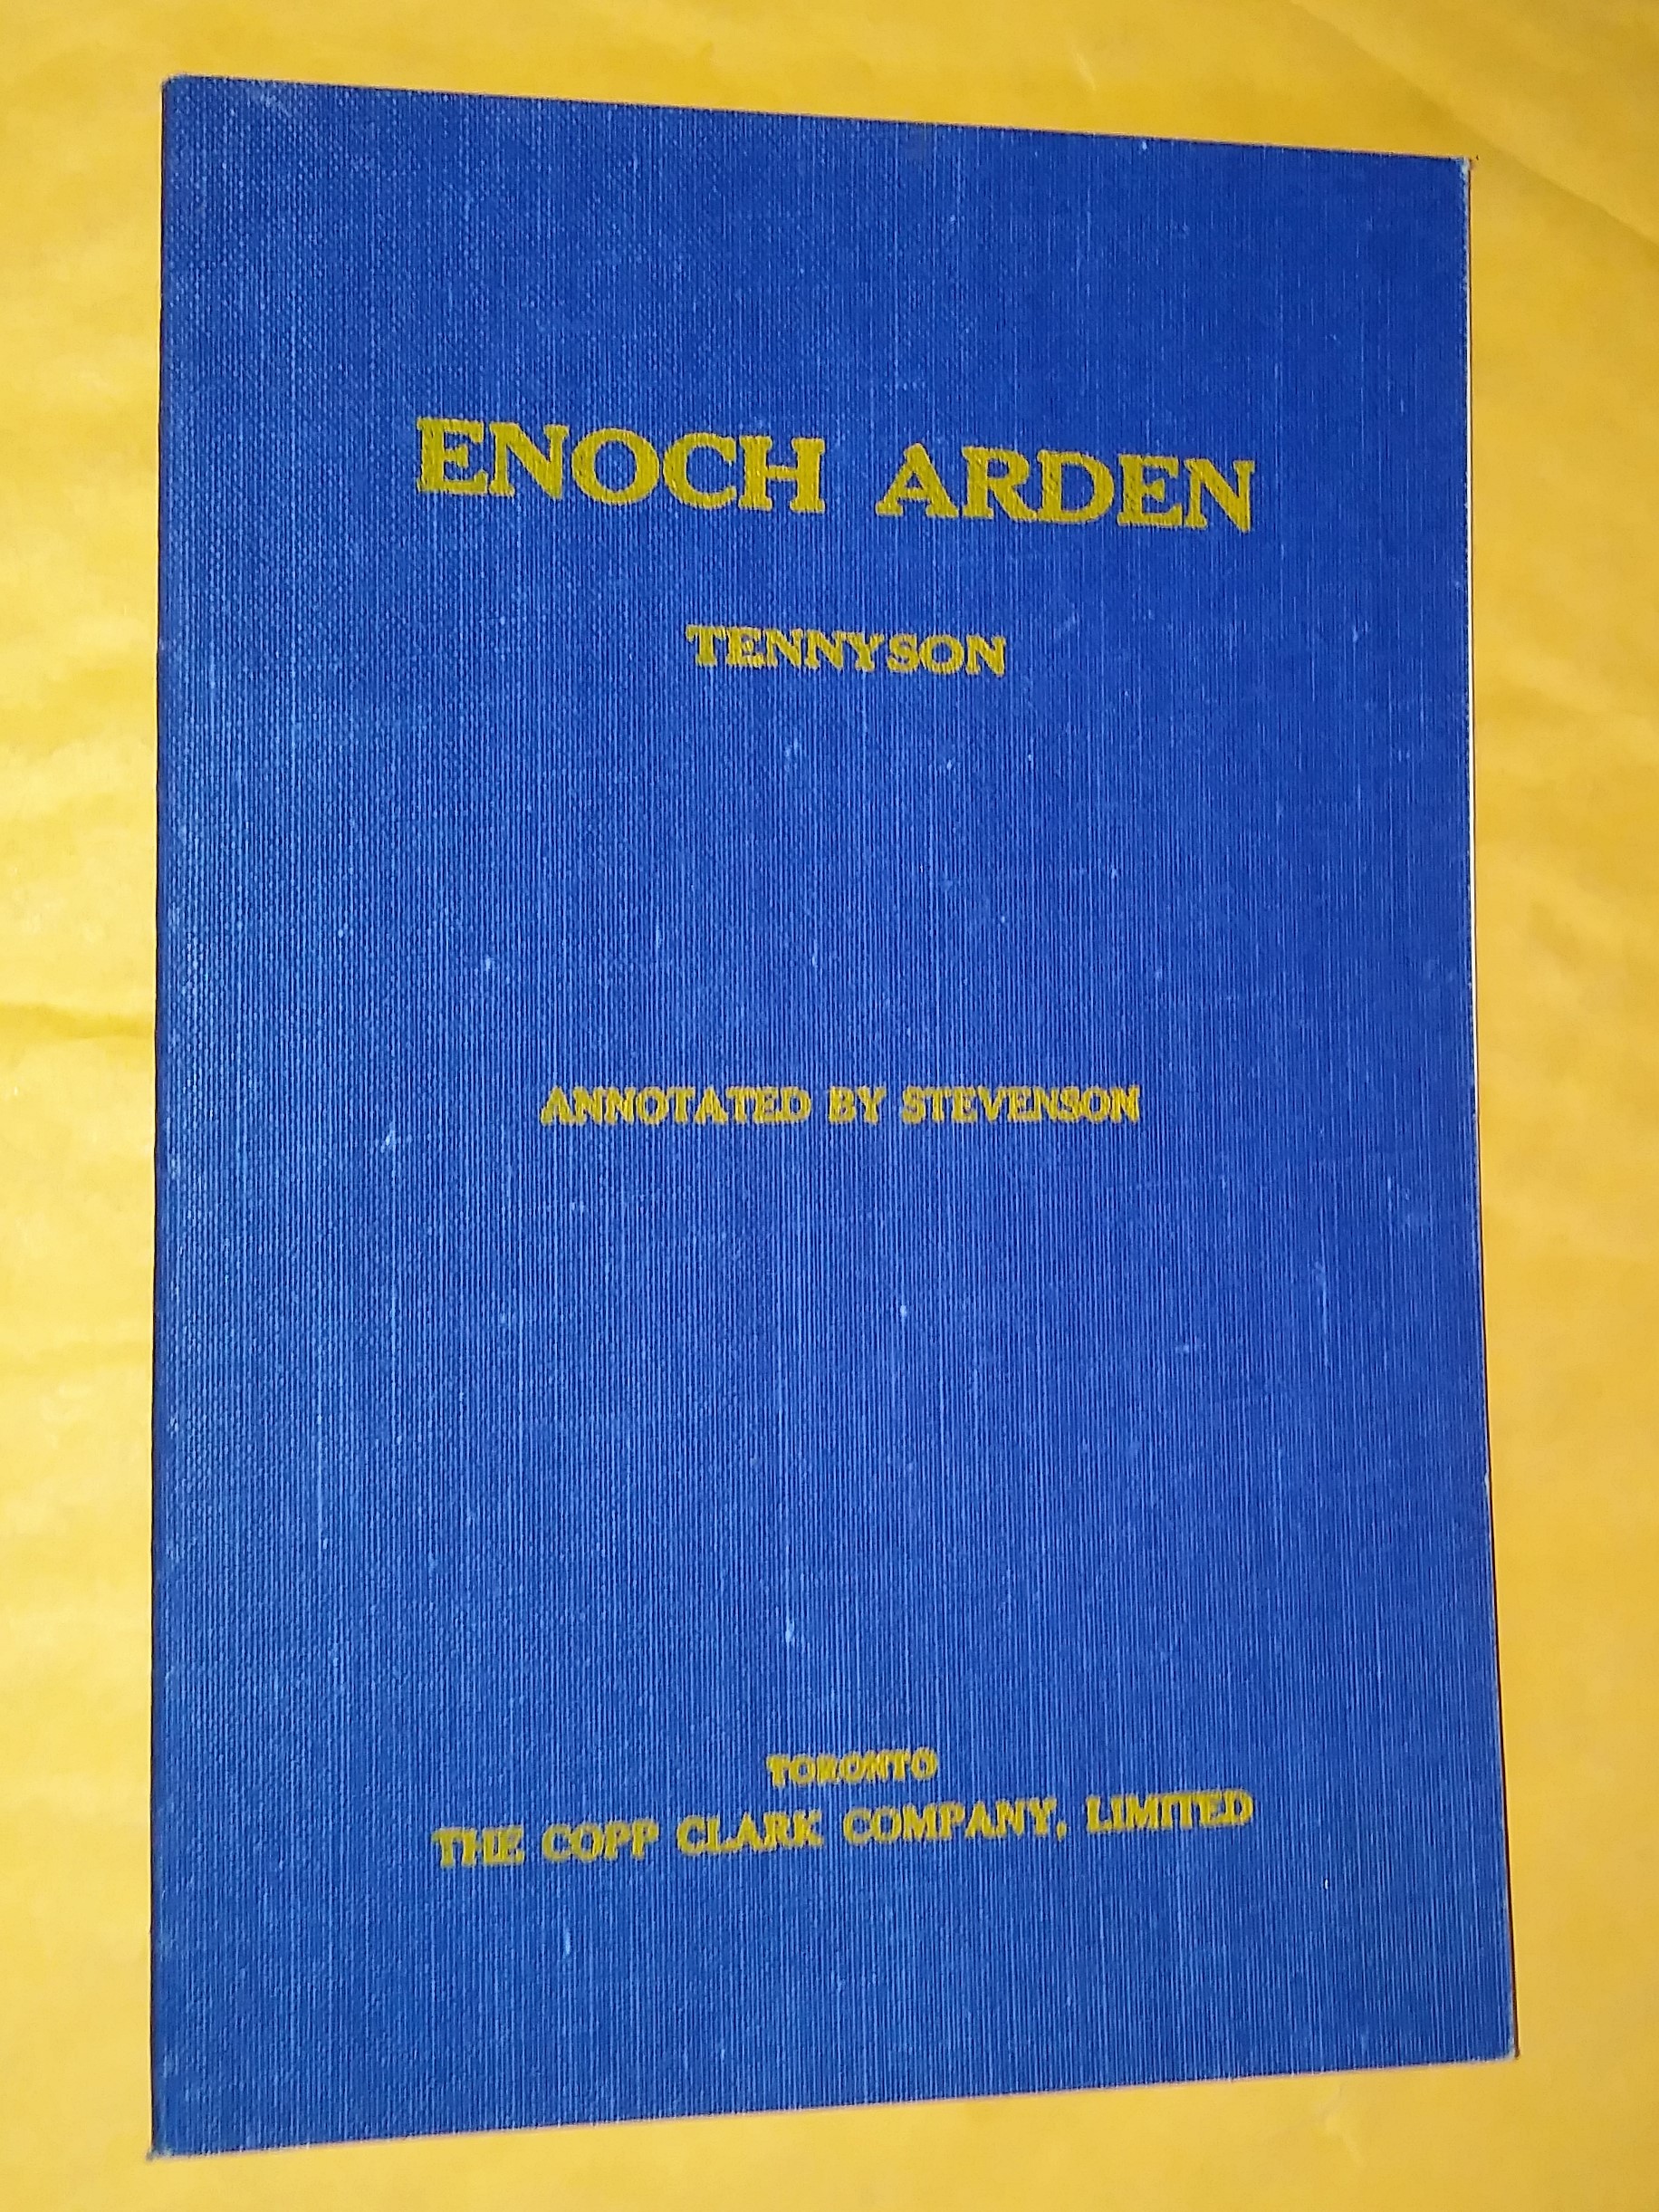 Enoch Arden by Alfred Tennyson - Annotated by G. J. Stevenson